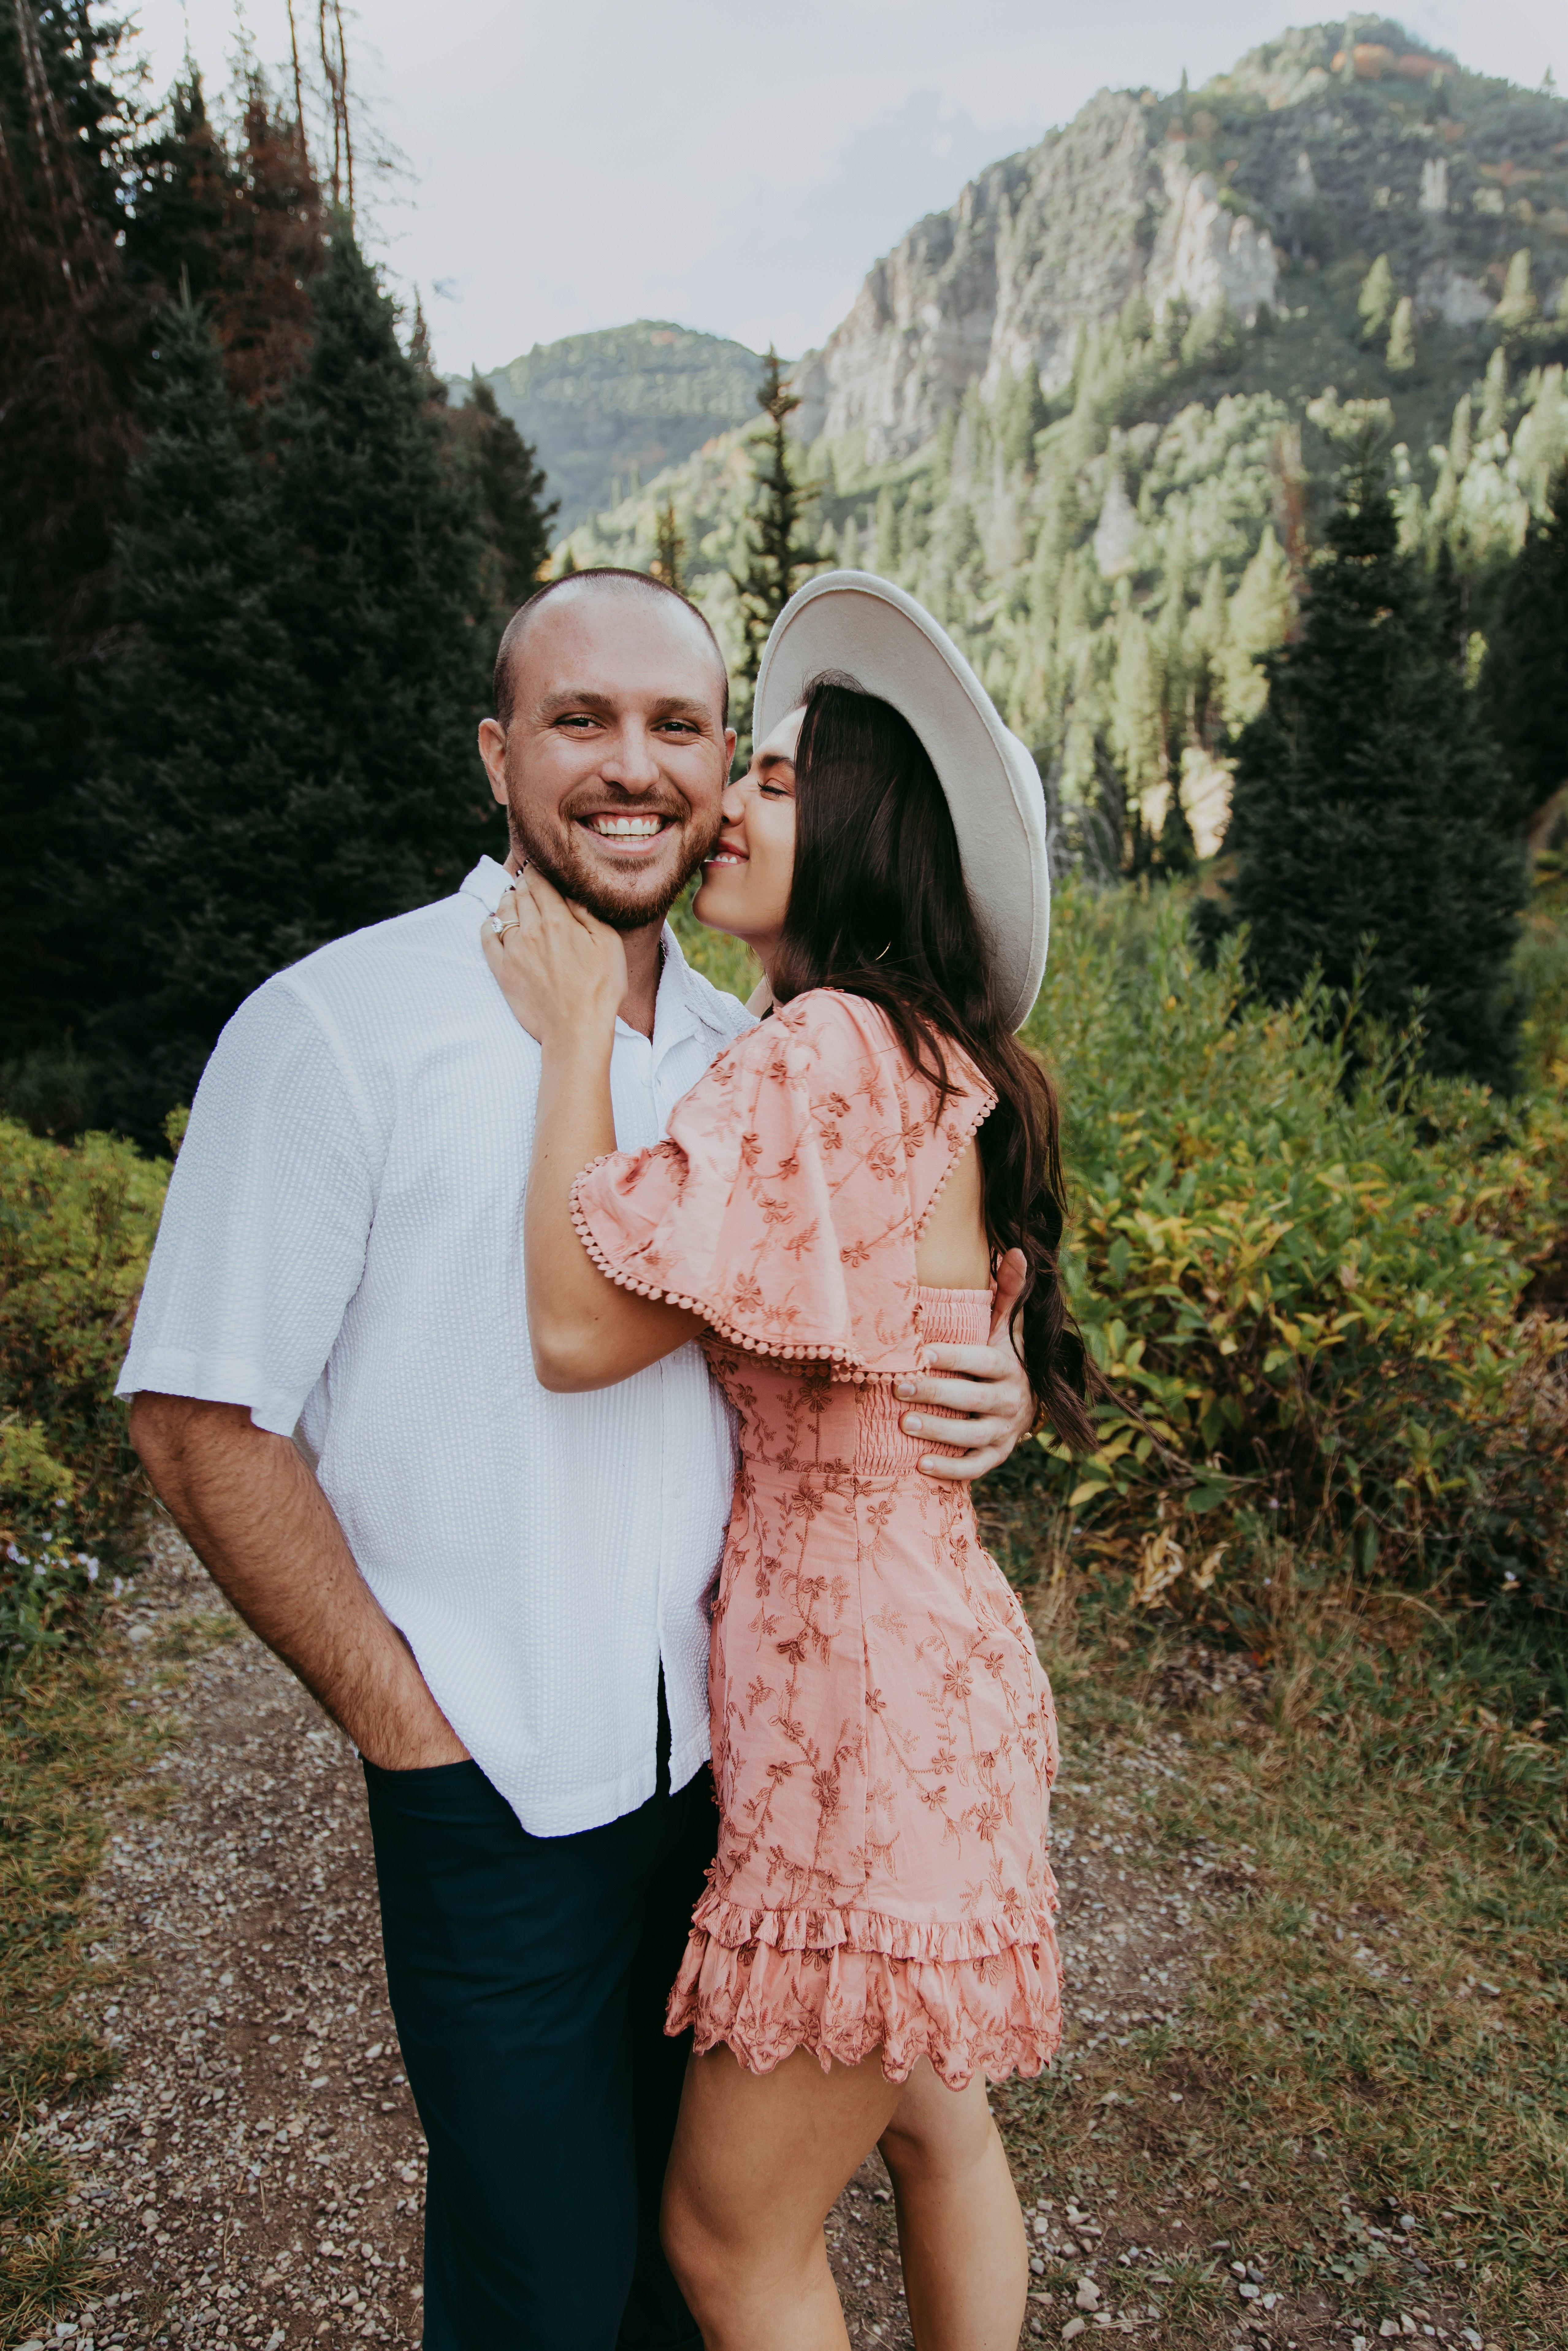 The Wedding Website of Taylor Brantley and Trace Wanless